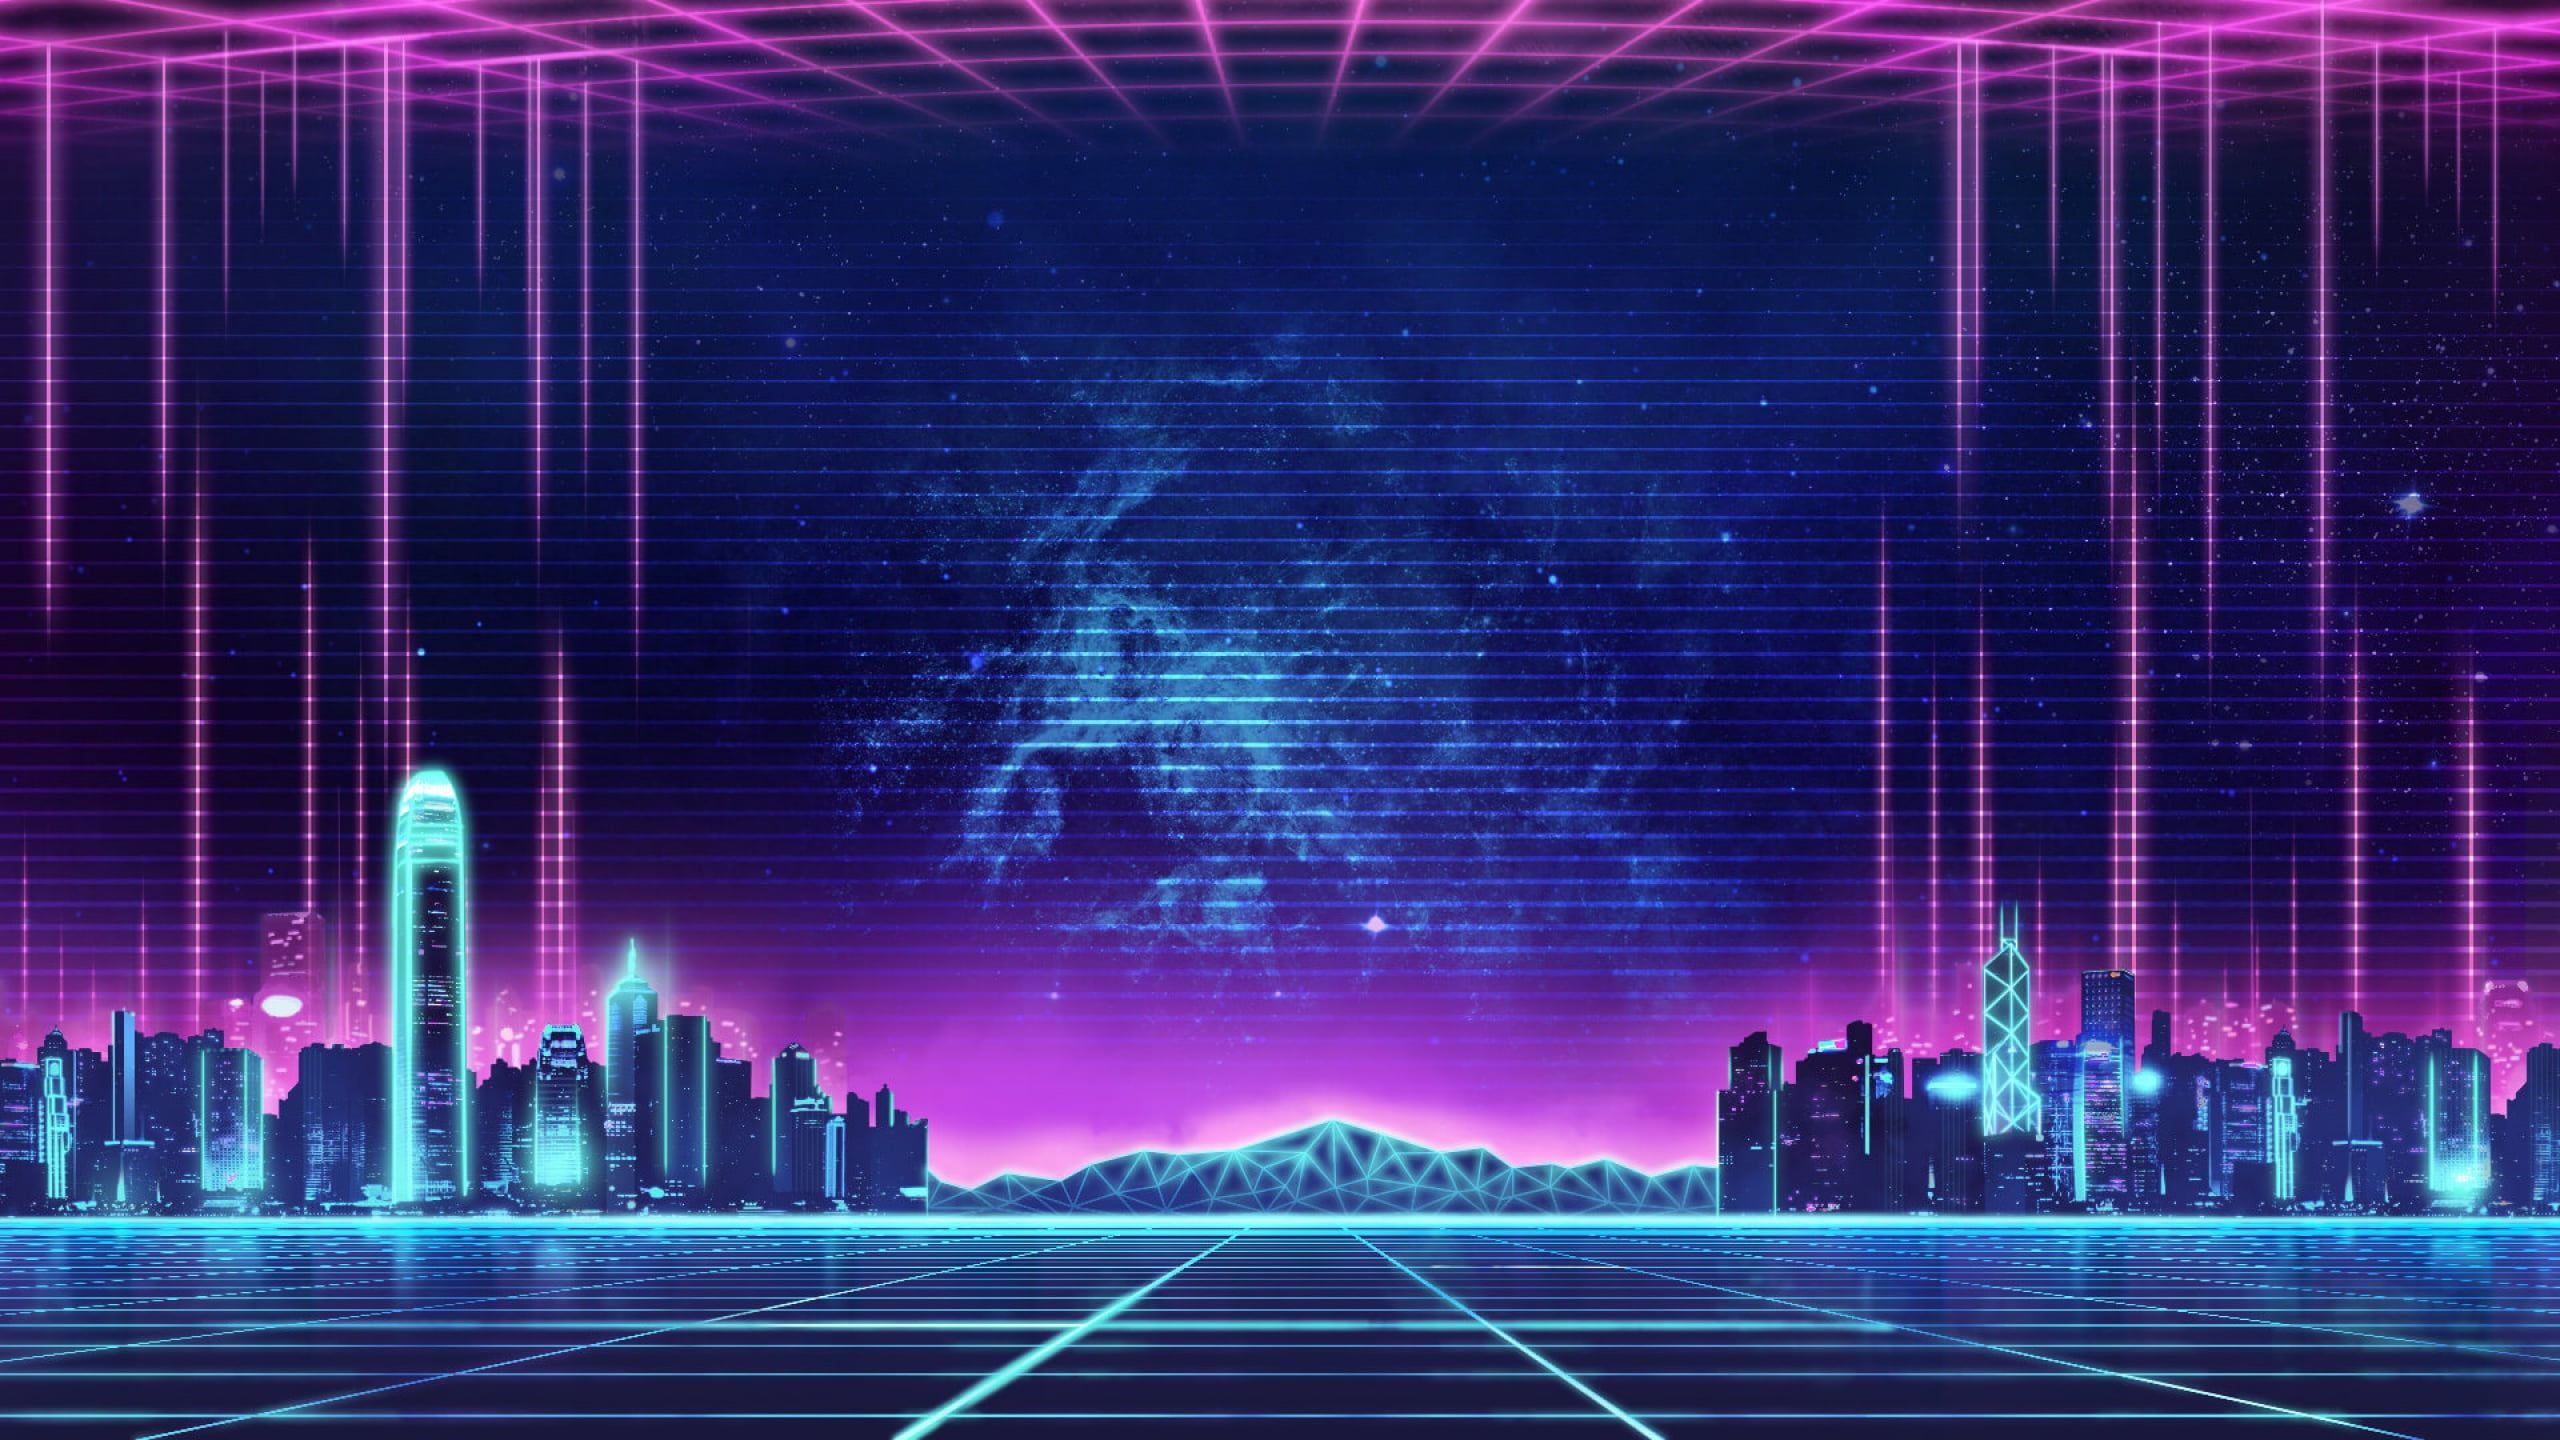 Music The city #Background #City s #Neon 's #Synth